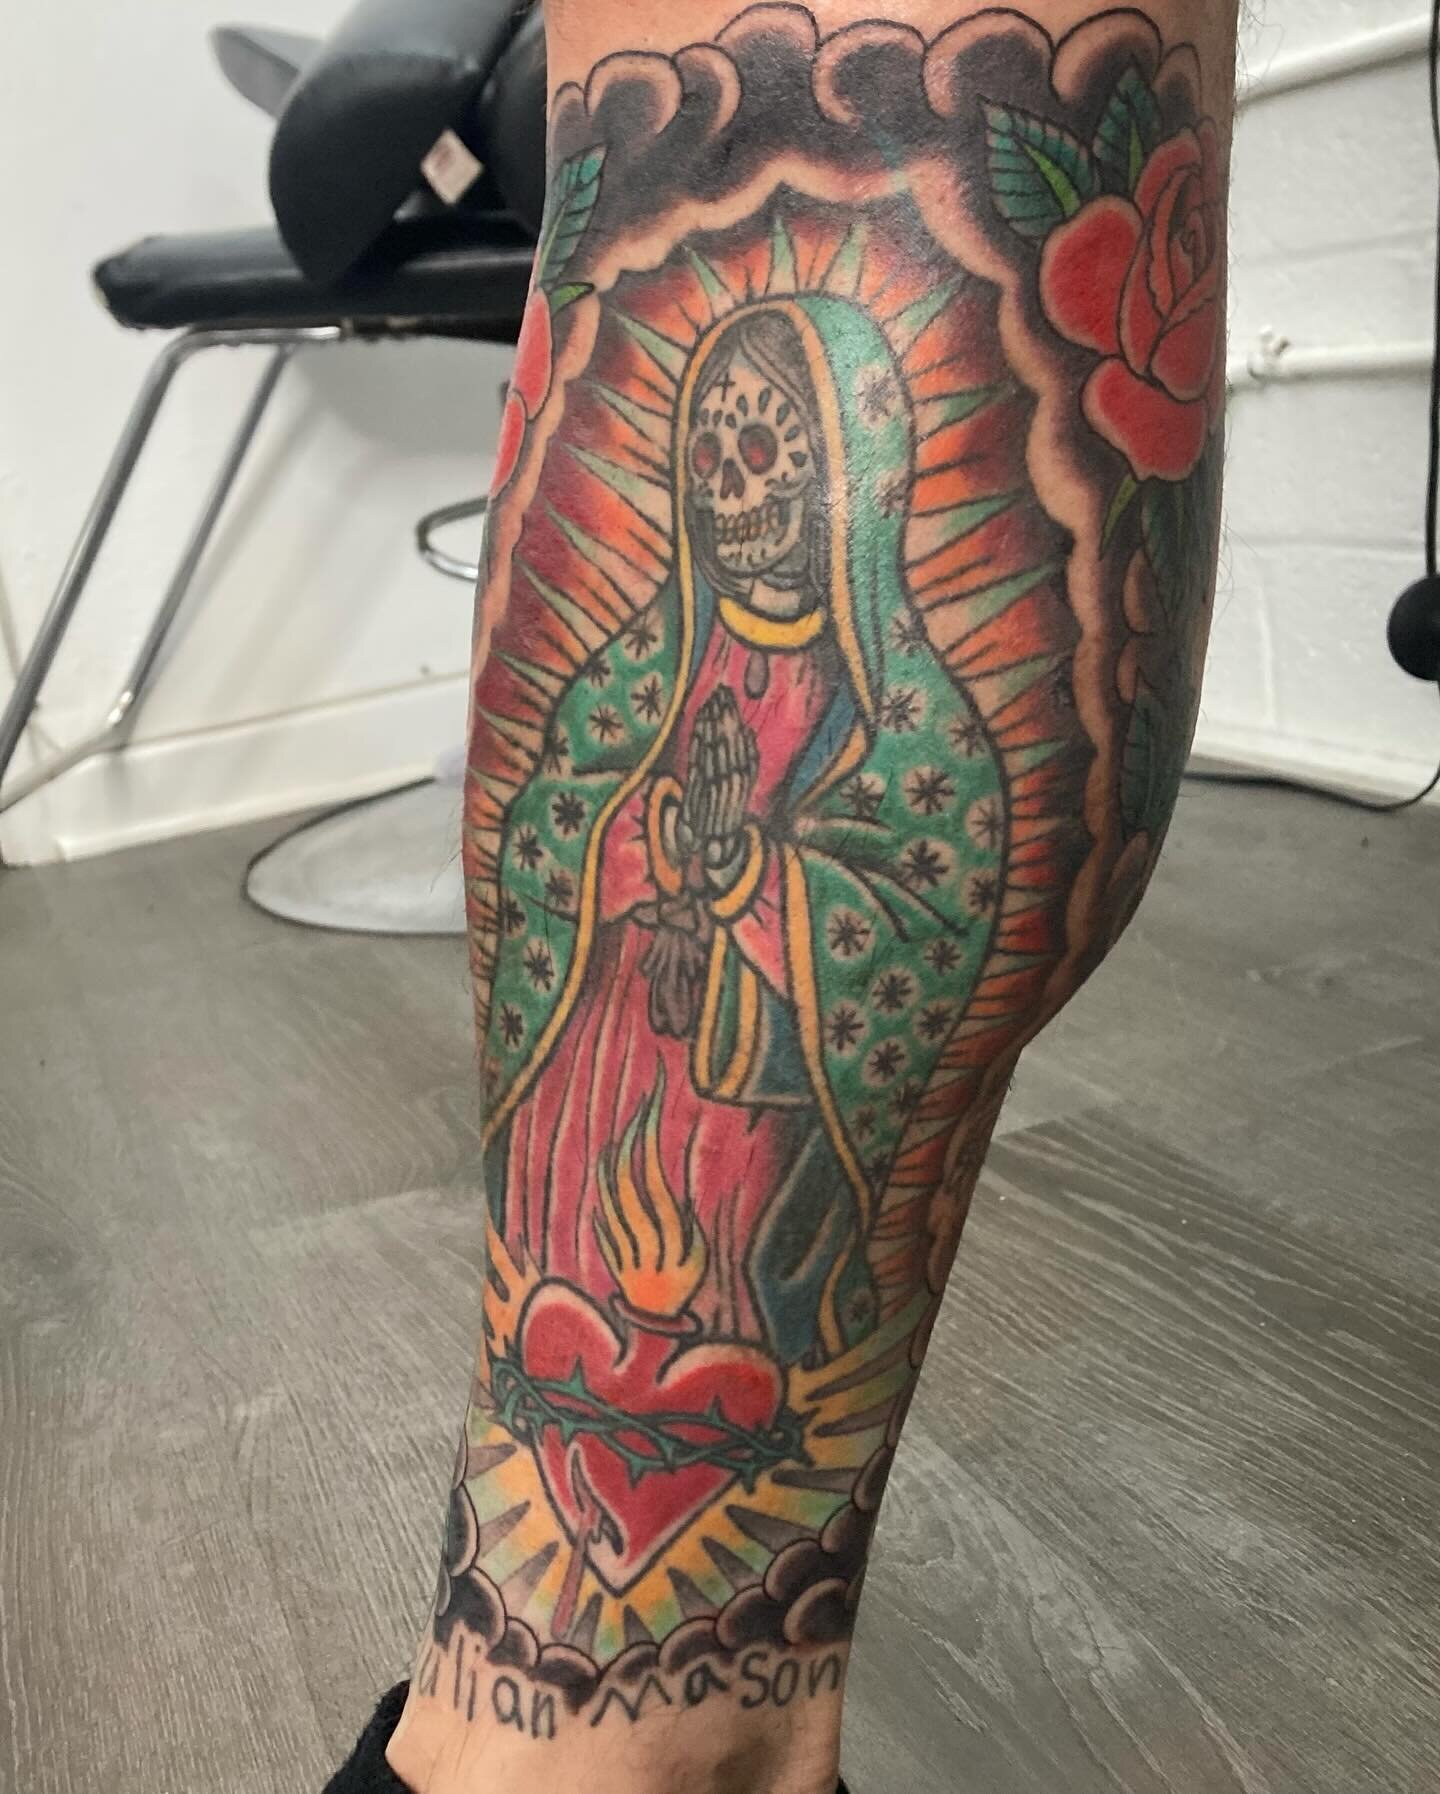 We added some roses and clouds to this skeletal Virgin of Guadalupe that I did a few years back.  Thanks for coming through Matt,  it&rsquo;s always good to hang!